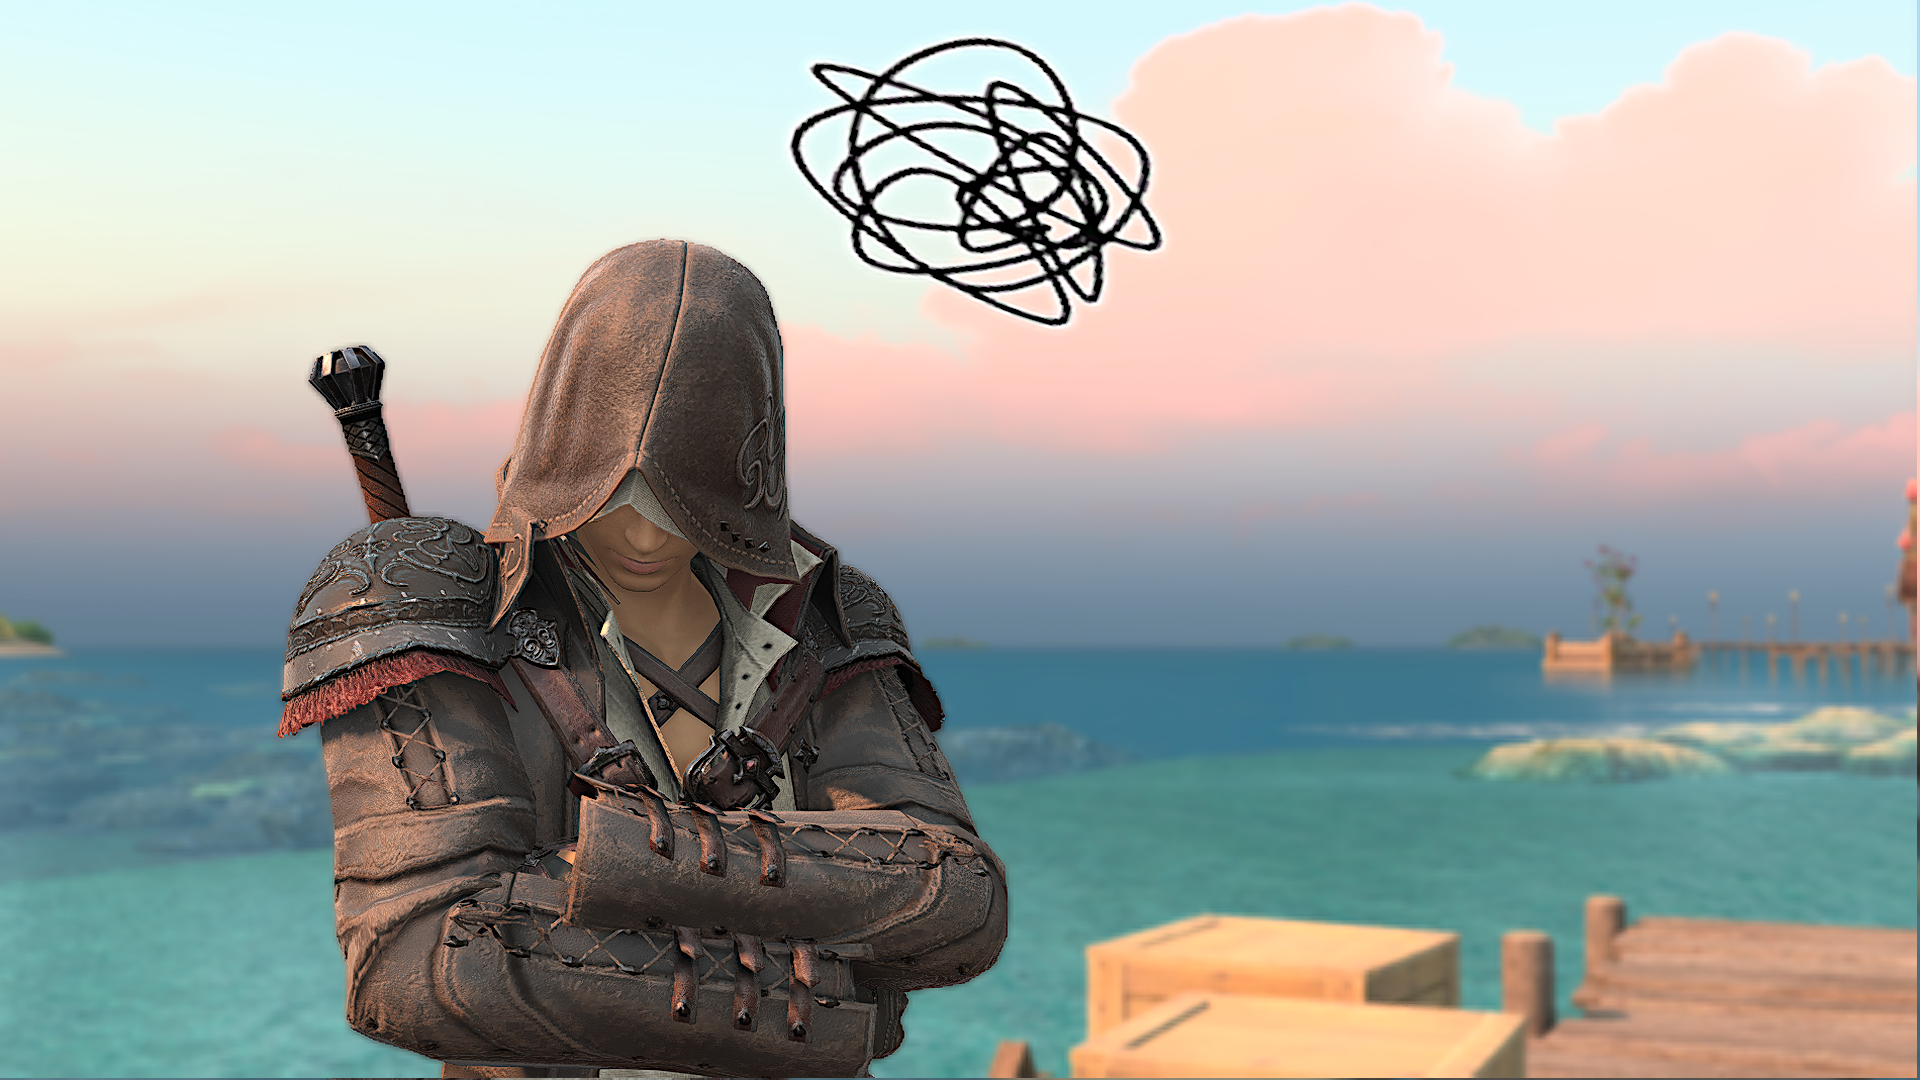 A viper in Final Fantasy 14: Dawntrail looking utterly perplexed, hood down, while stood on a beautiful sunrise overlooking a crystal blue sea.